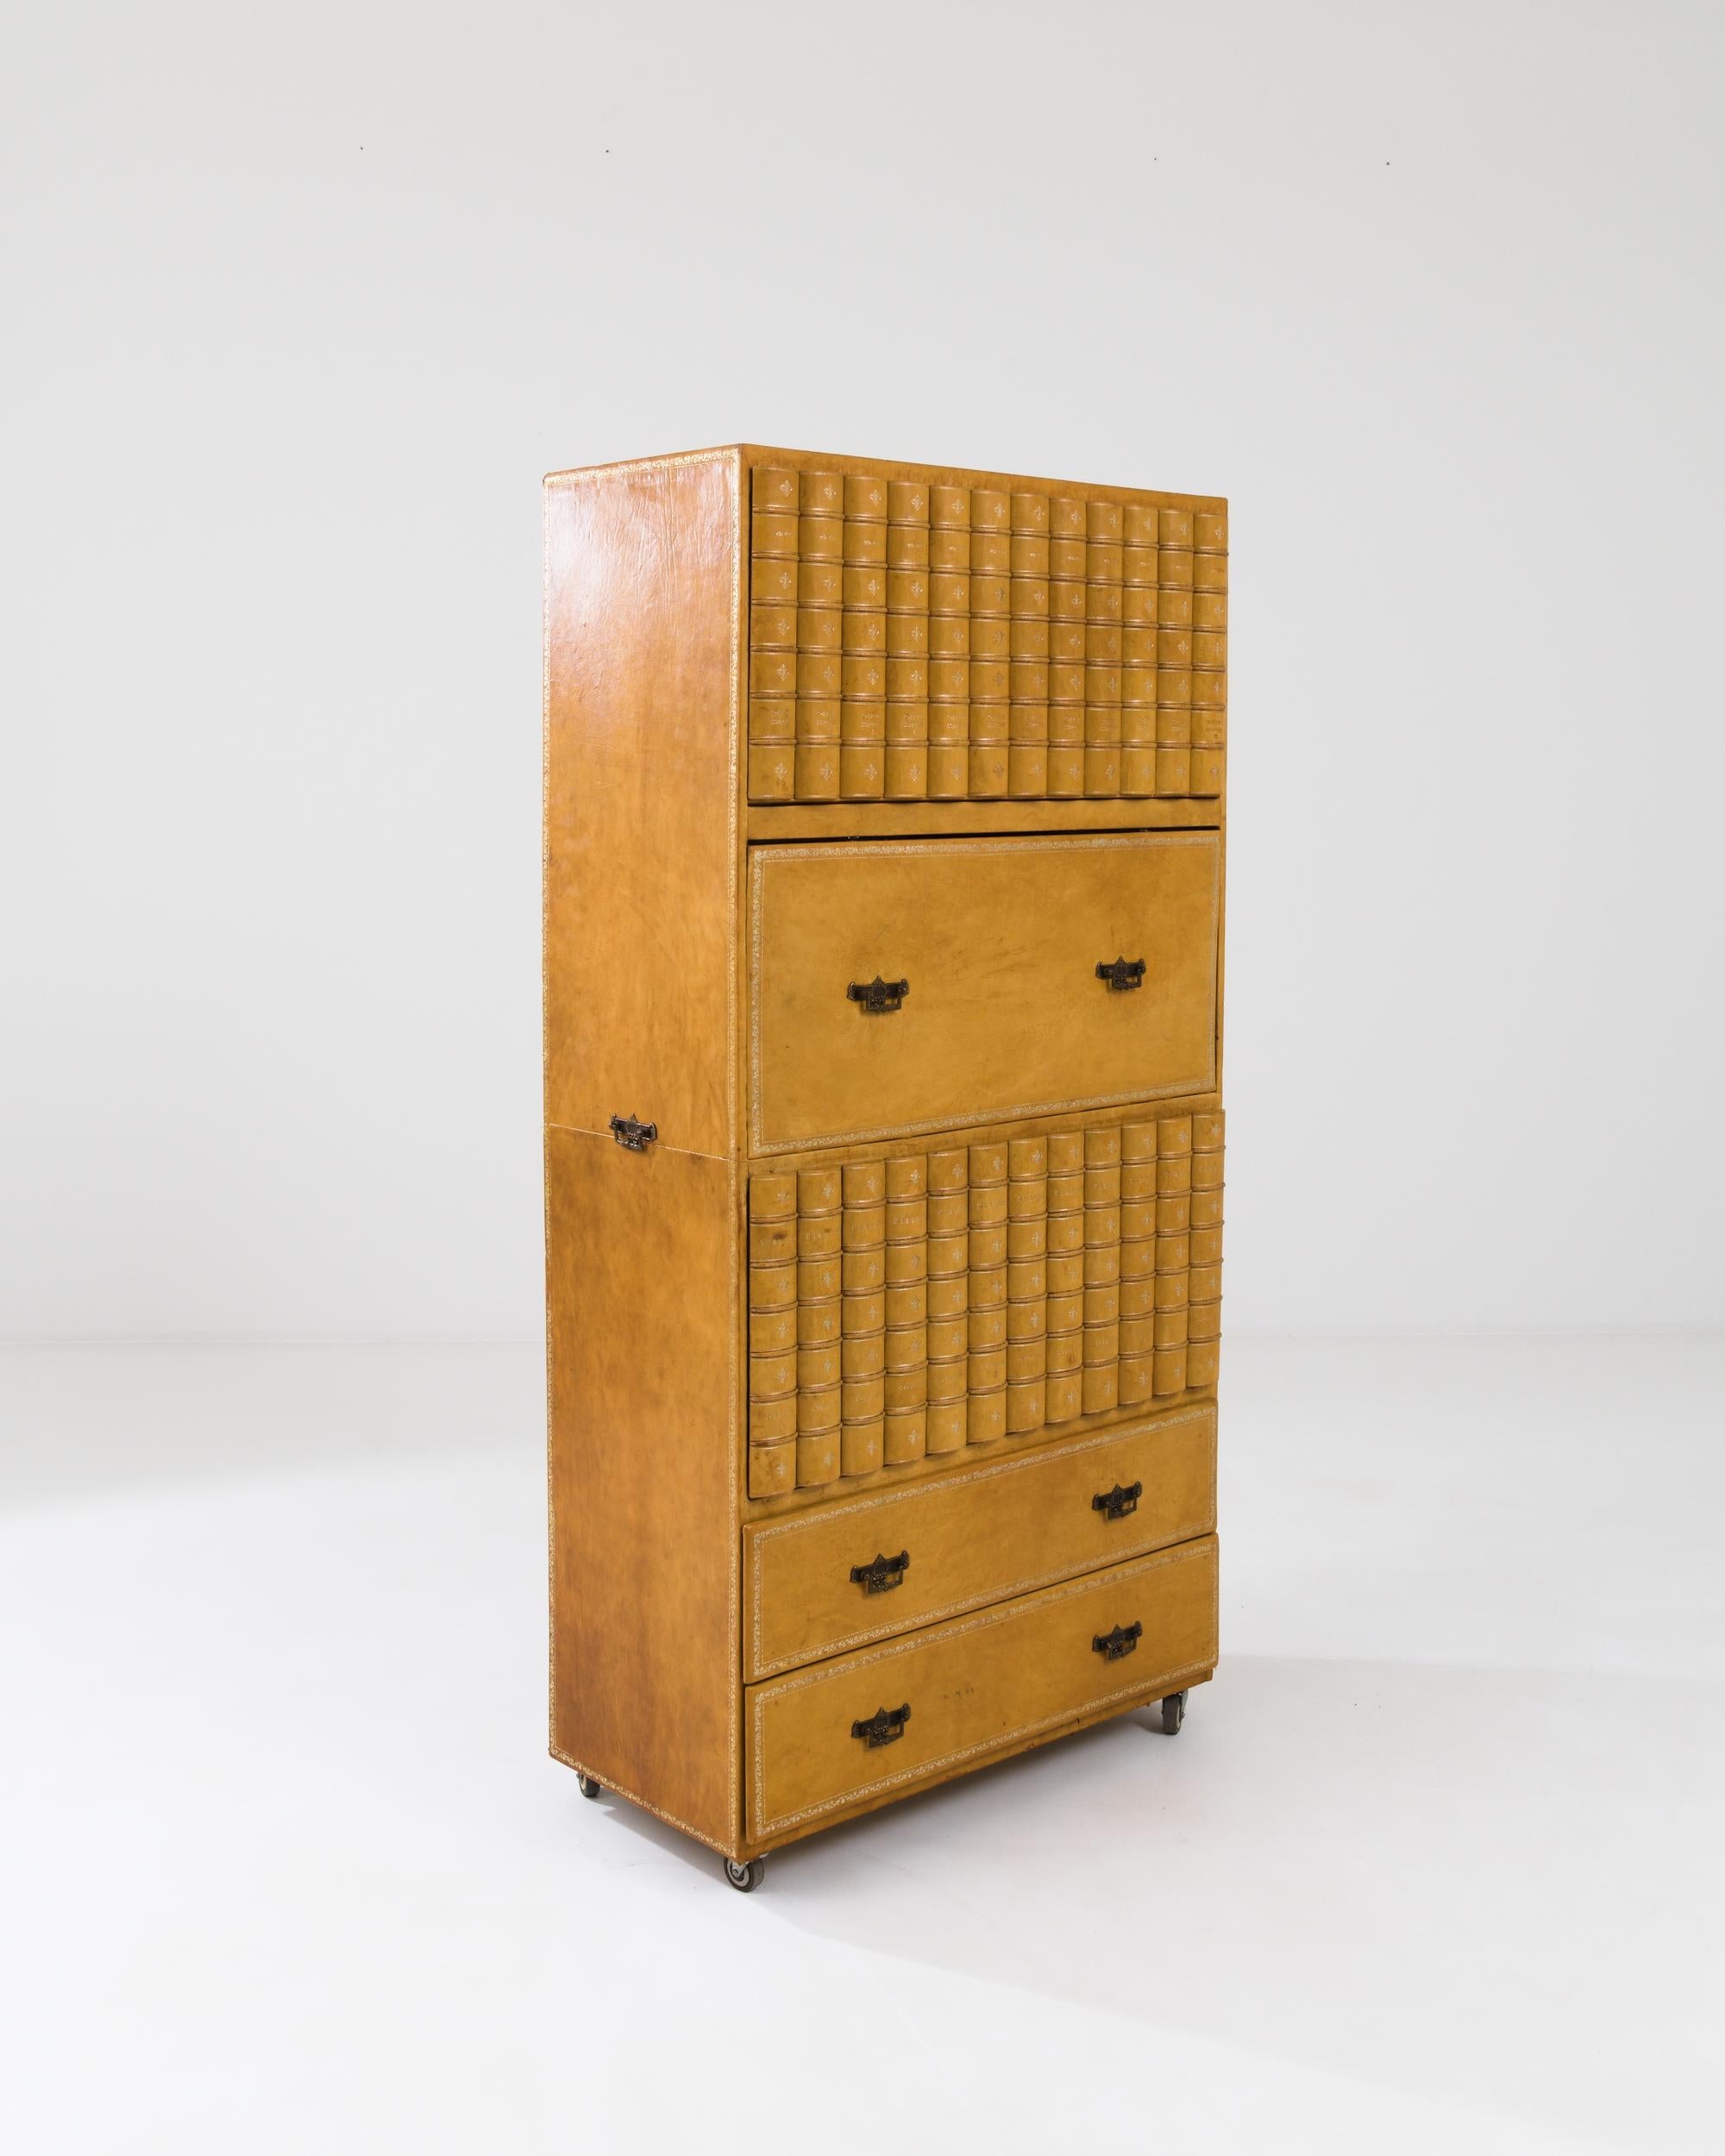 A wooden cabinet made in the UK during the 20th century. Composed of a series of collapsing doors, storage compartments, and drawers, this complex yet organized cabinet offers a chic display of utilitarian function. The gleaming book-bound surface